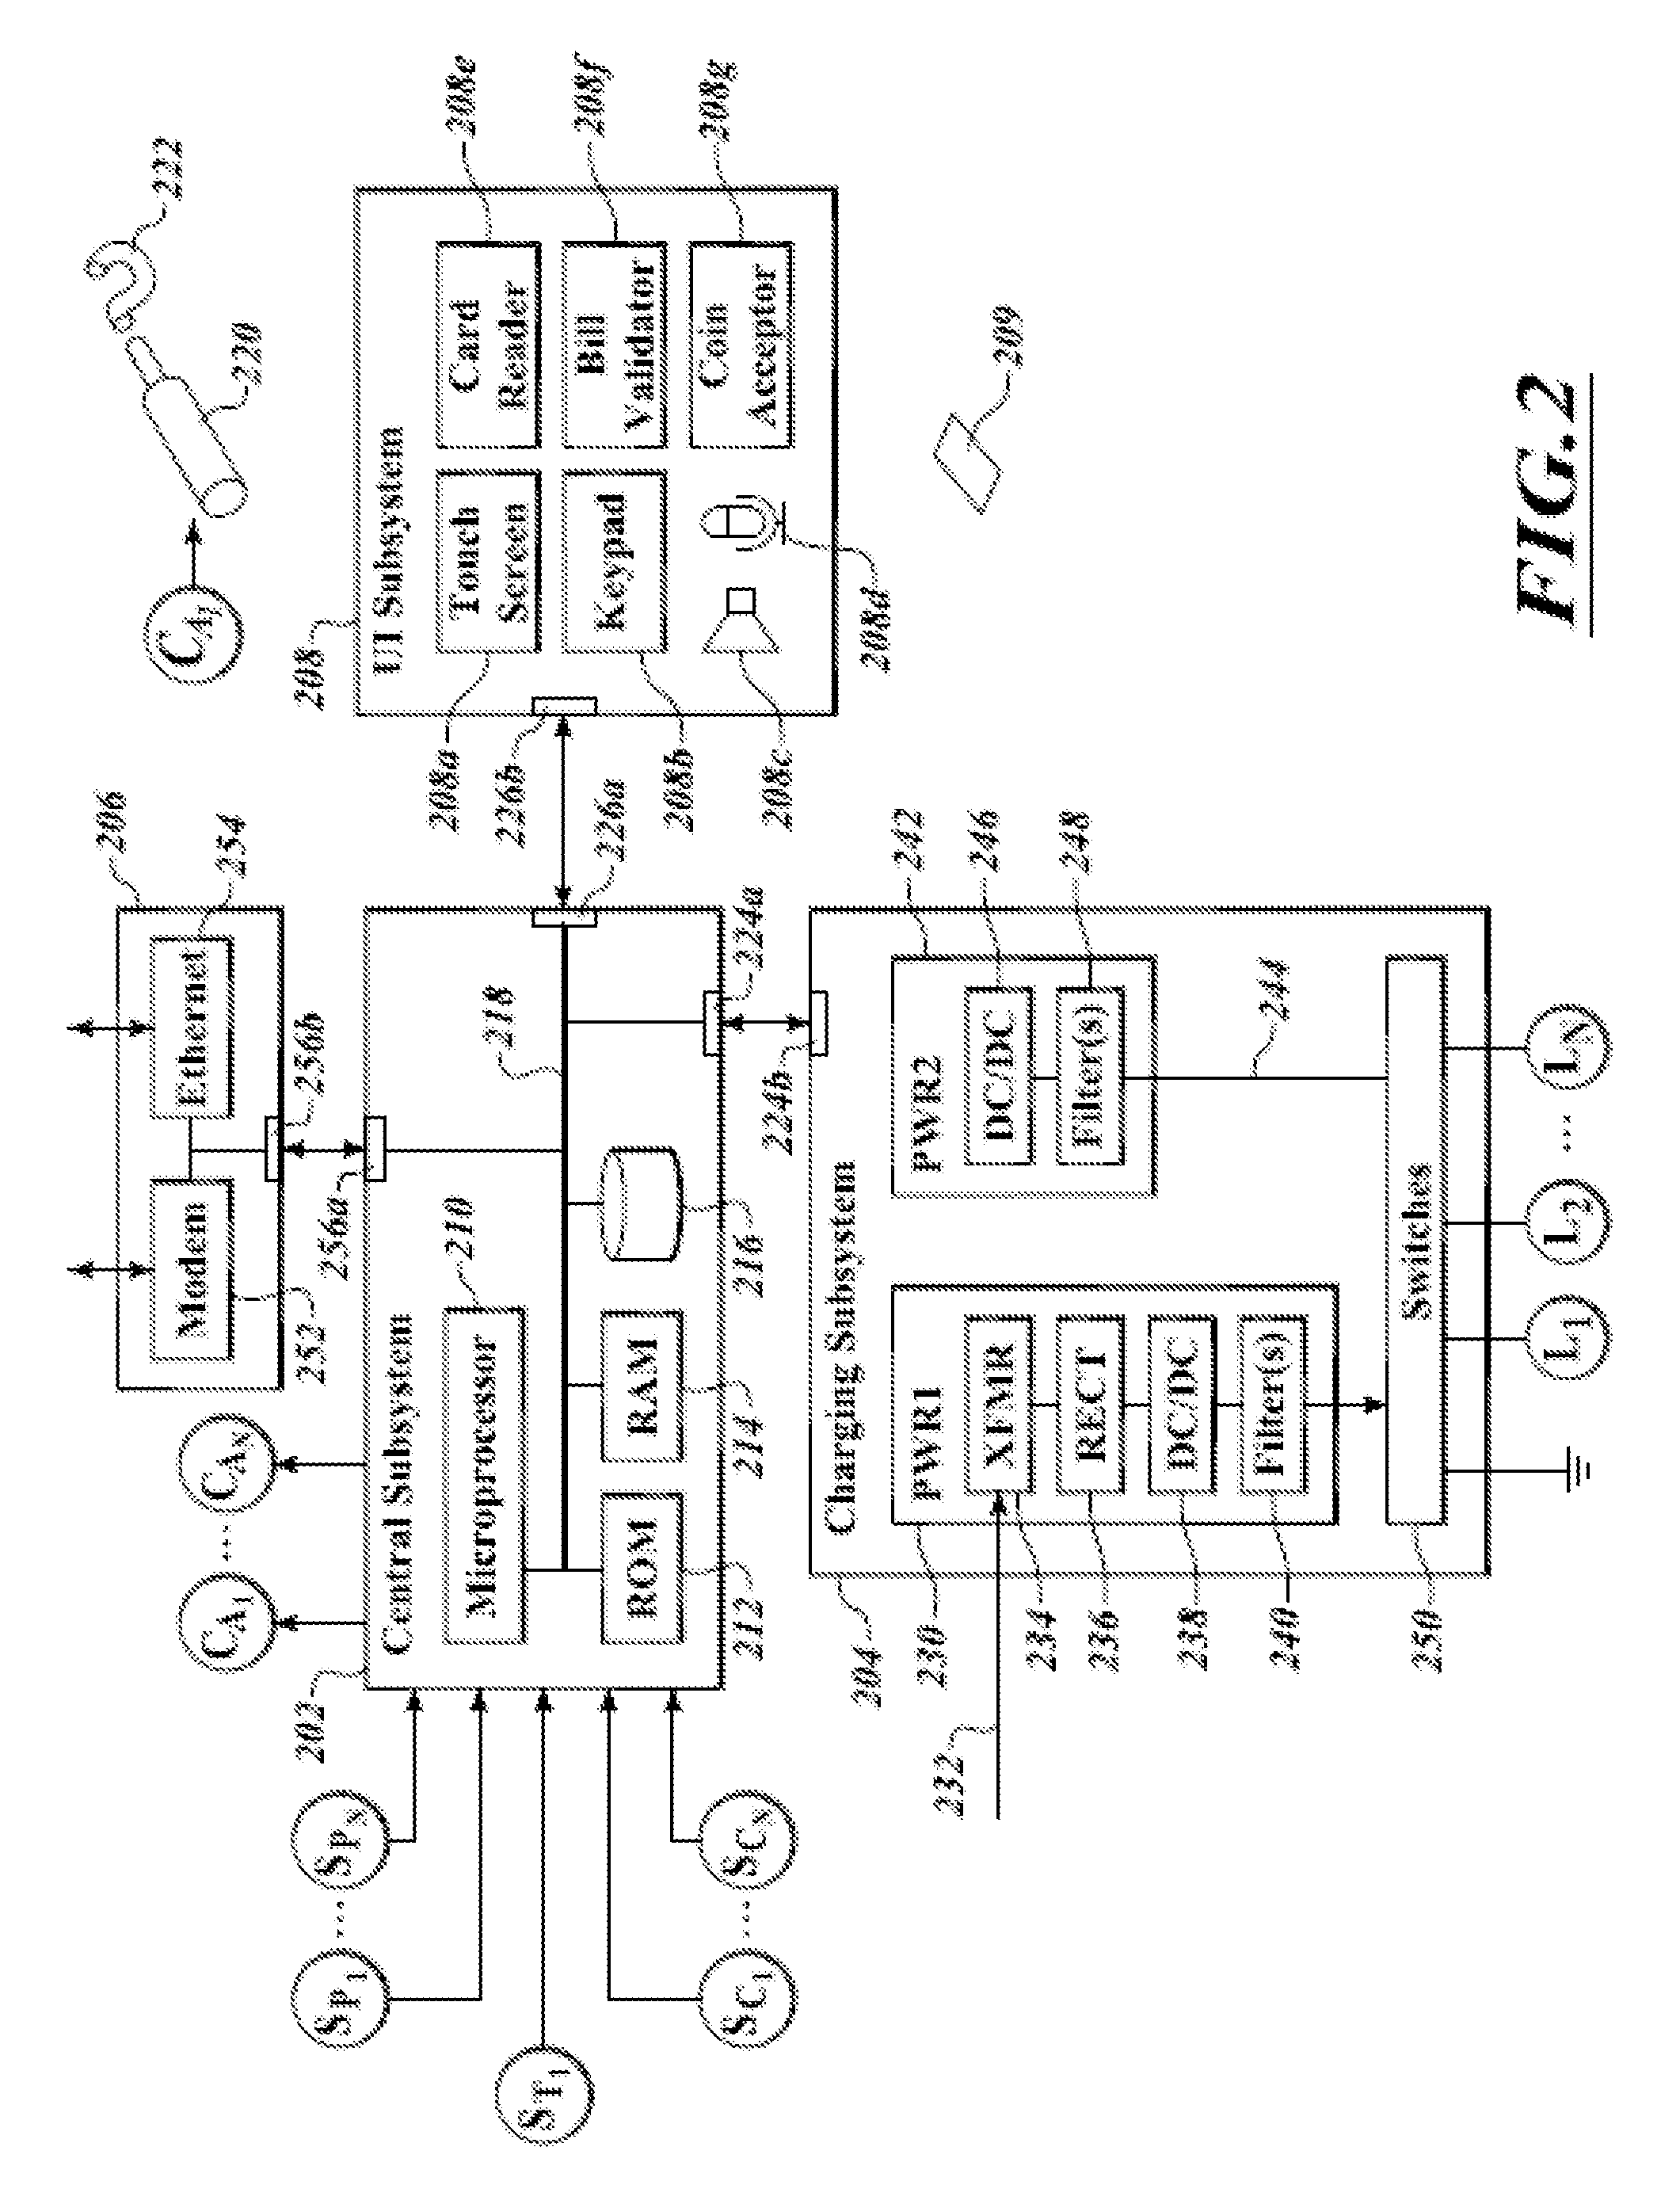 Apparatus, method and article for authentication, security and control of power storage devices, such as batteries